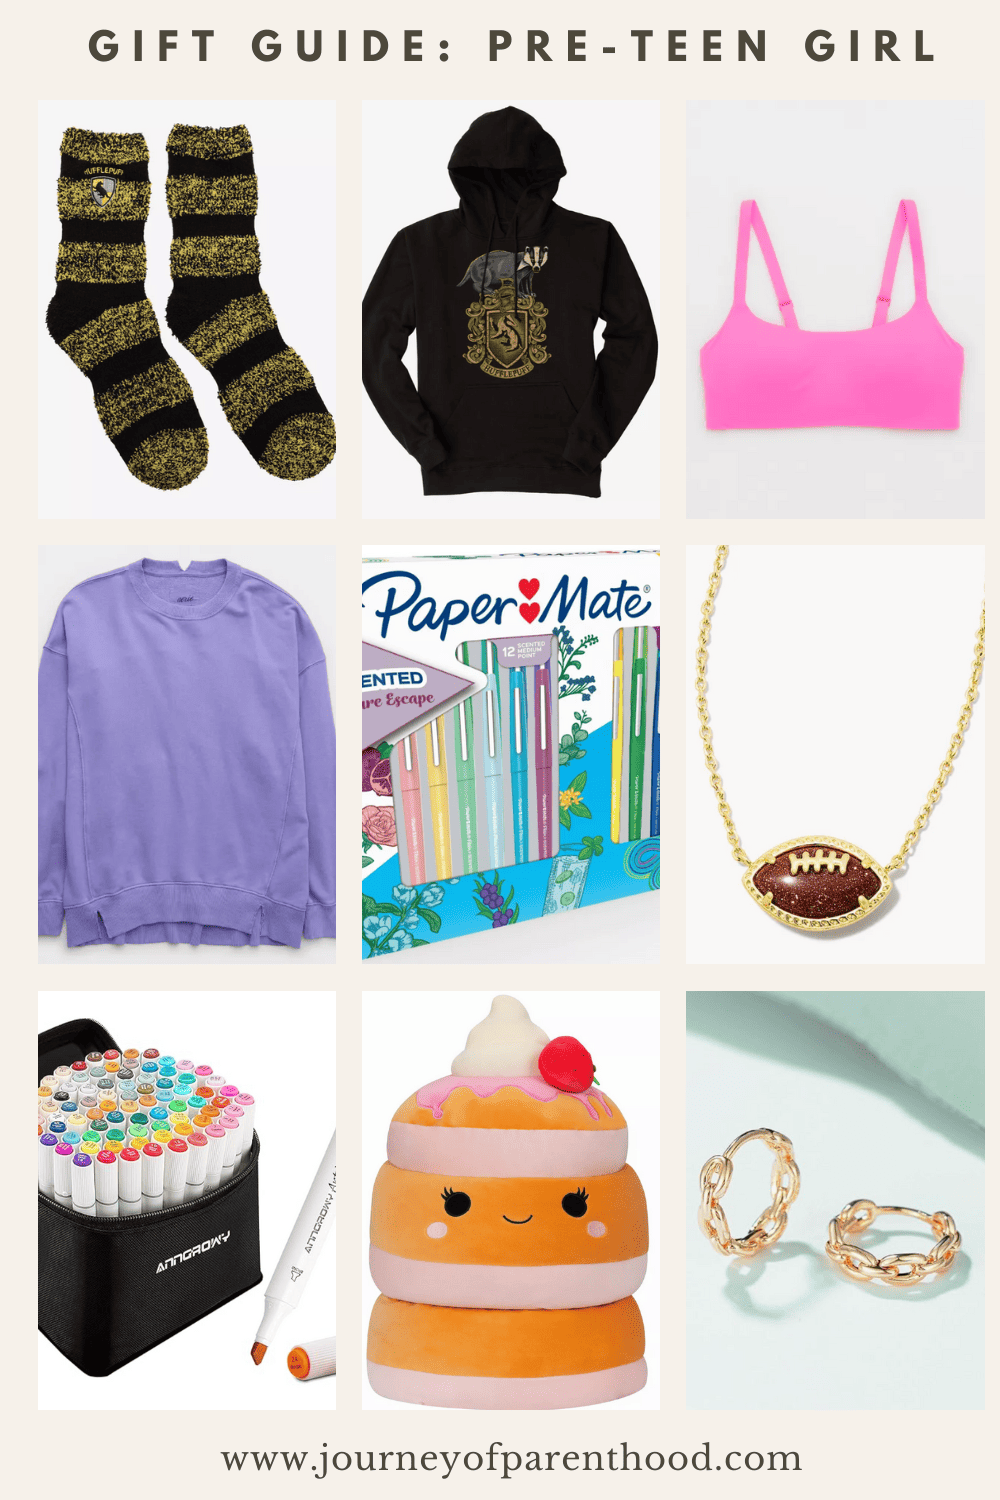 pre-teen girl gift guide - gift ideas for a 12 year old girl - what i'm buying my 12 year old daughter for Christmas this year